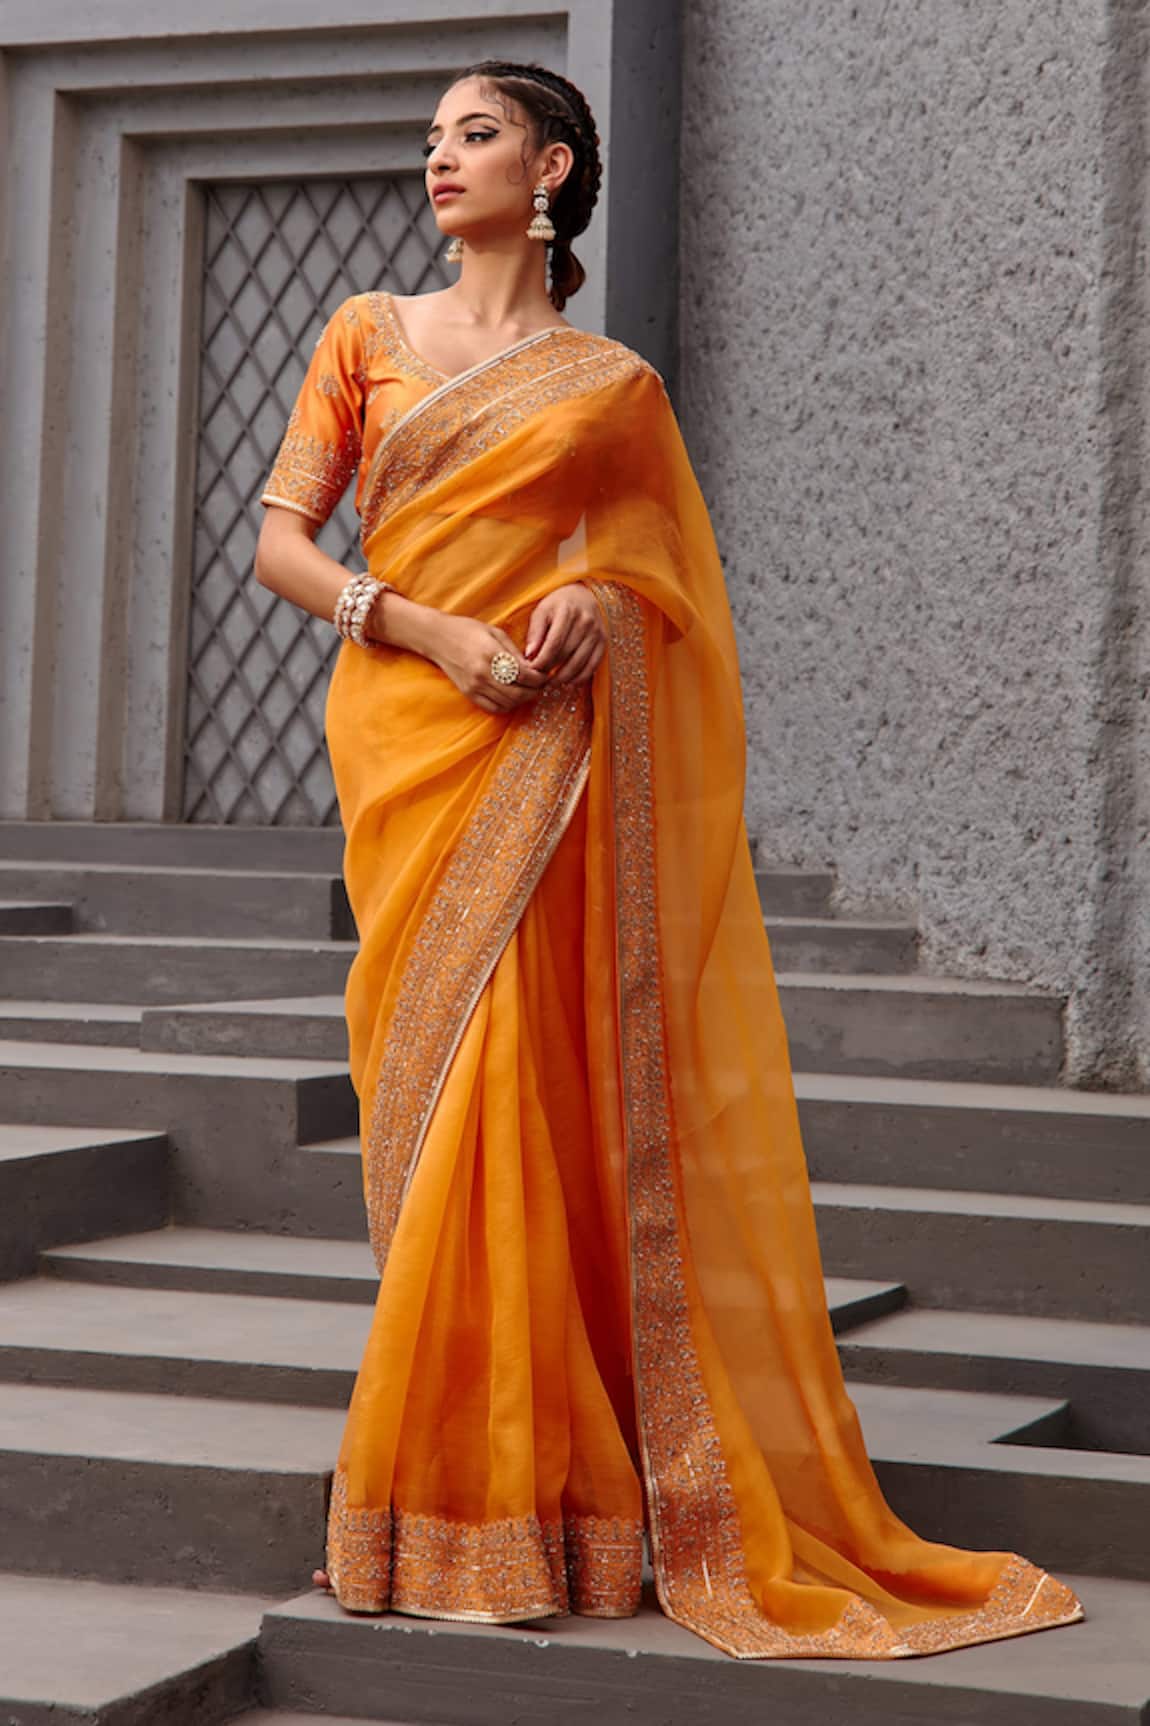 Jigar Mali Embroidered Saree With Blouse